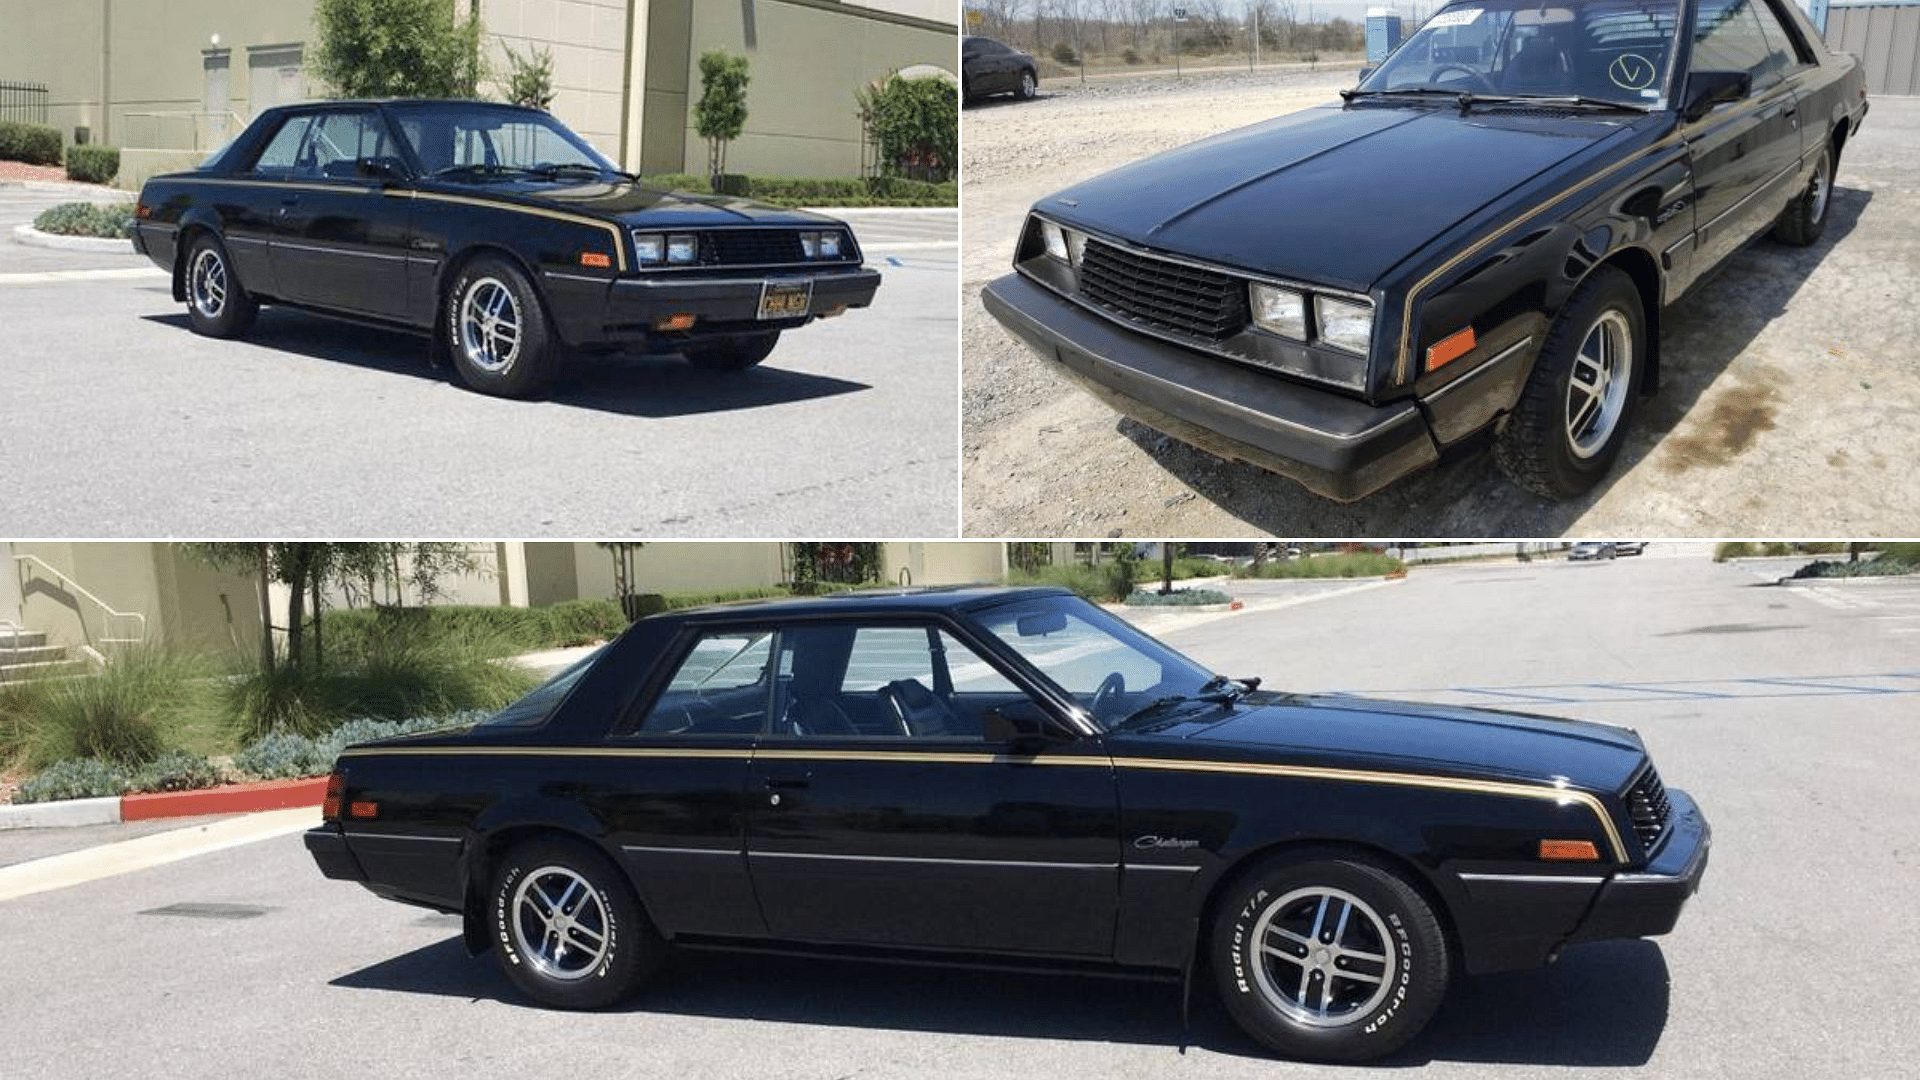 black 1982 Dodge Challenger Second Generation coupe front and side views